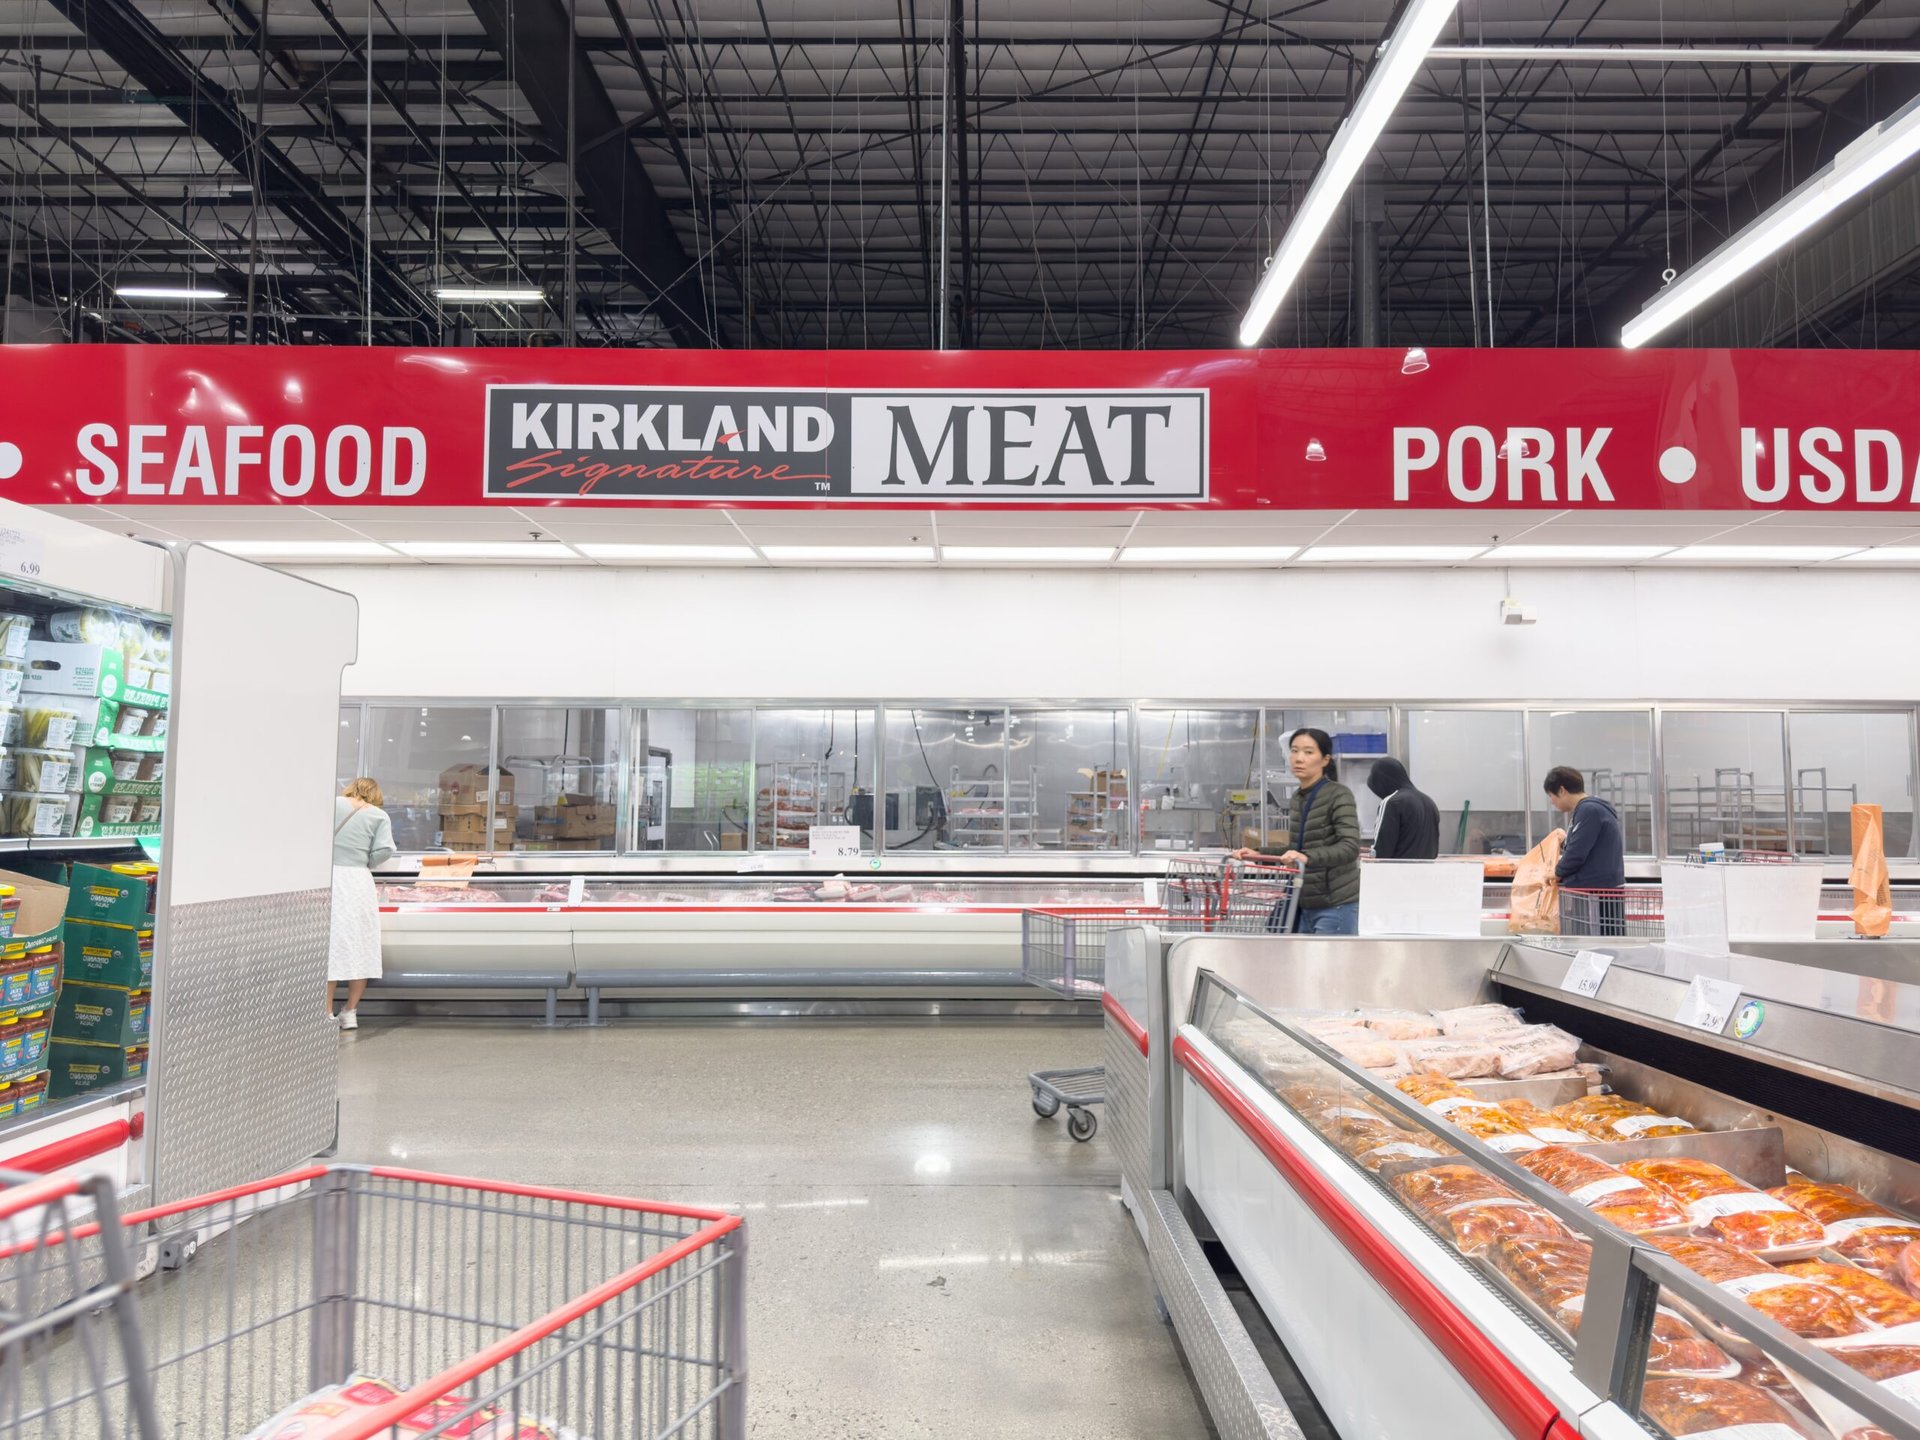 The Latest Products Available at Costco